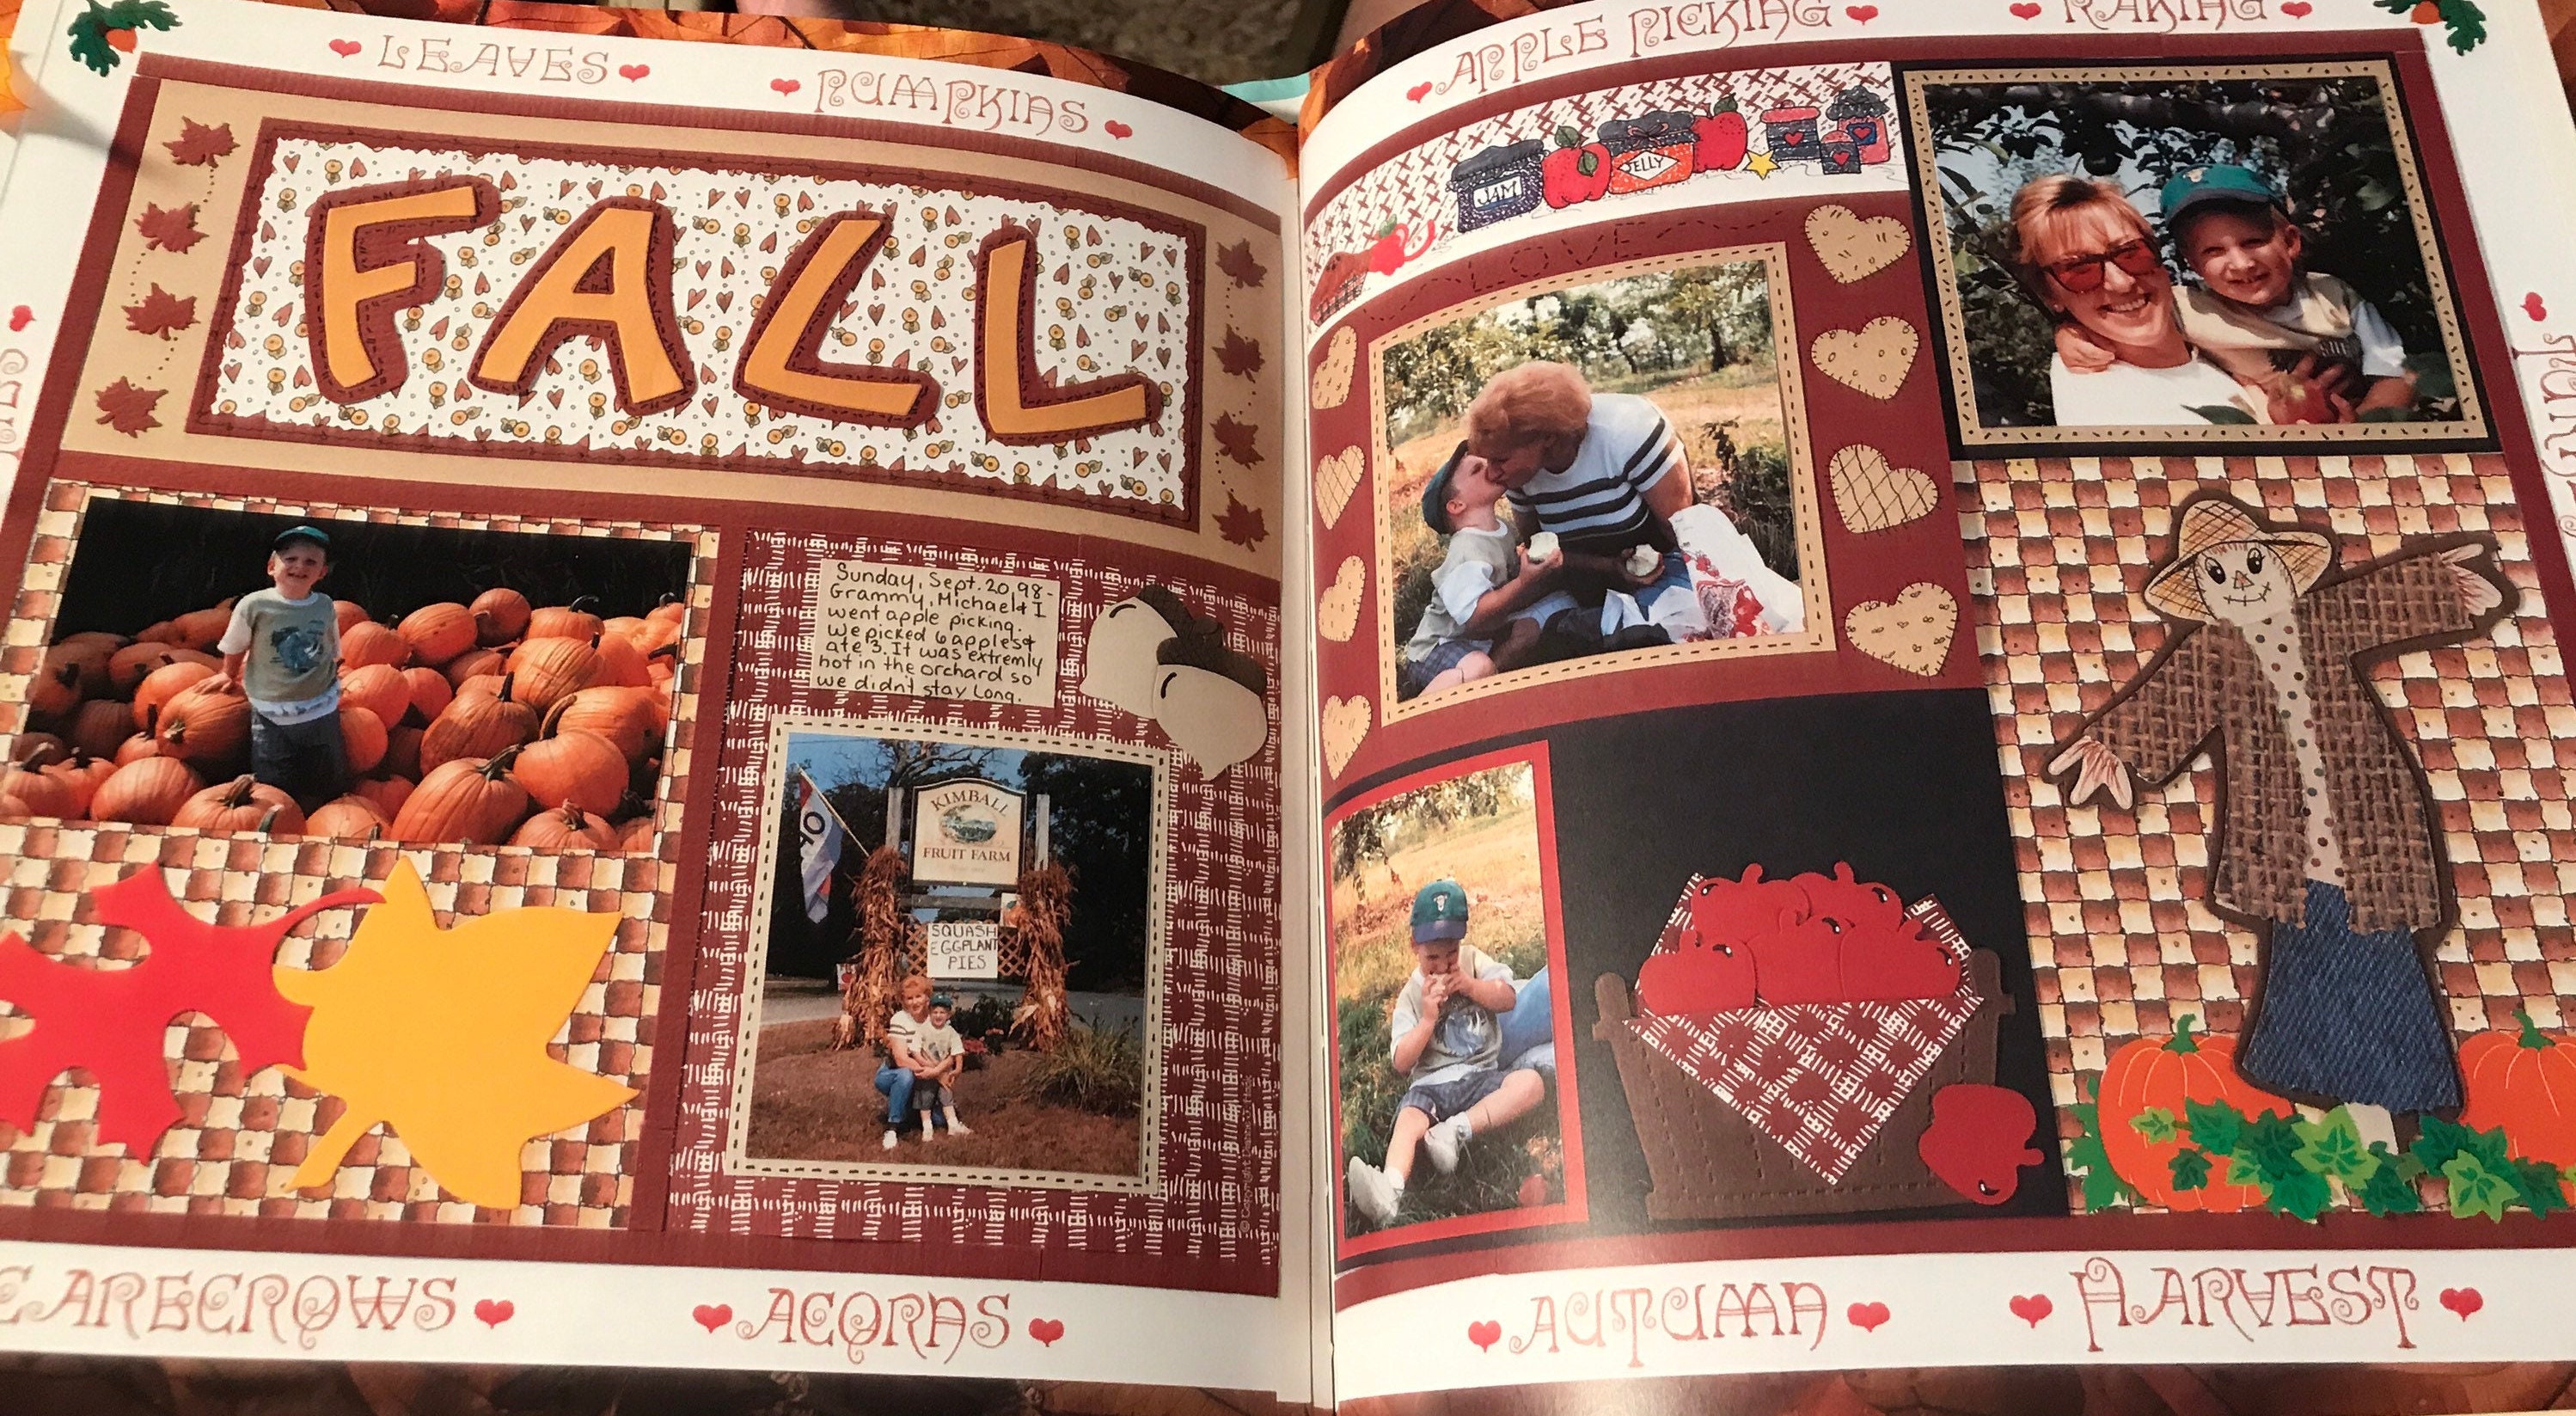 The Big Book of Scrapbook Pages by Memory Makers: 9781599633022